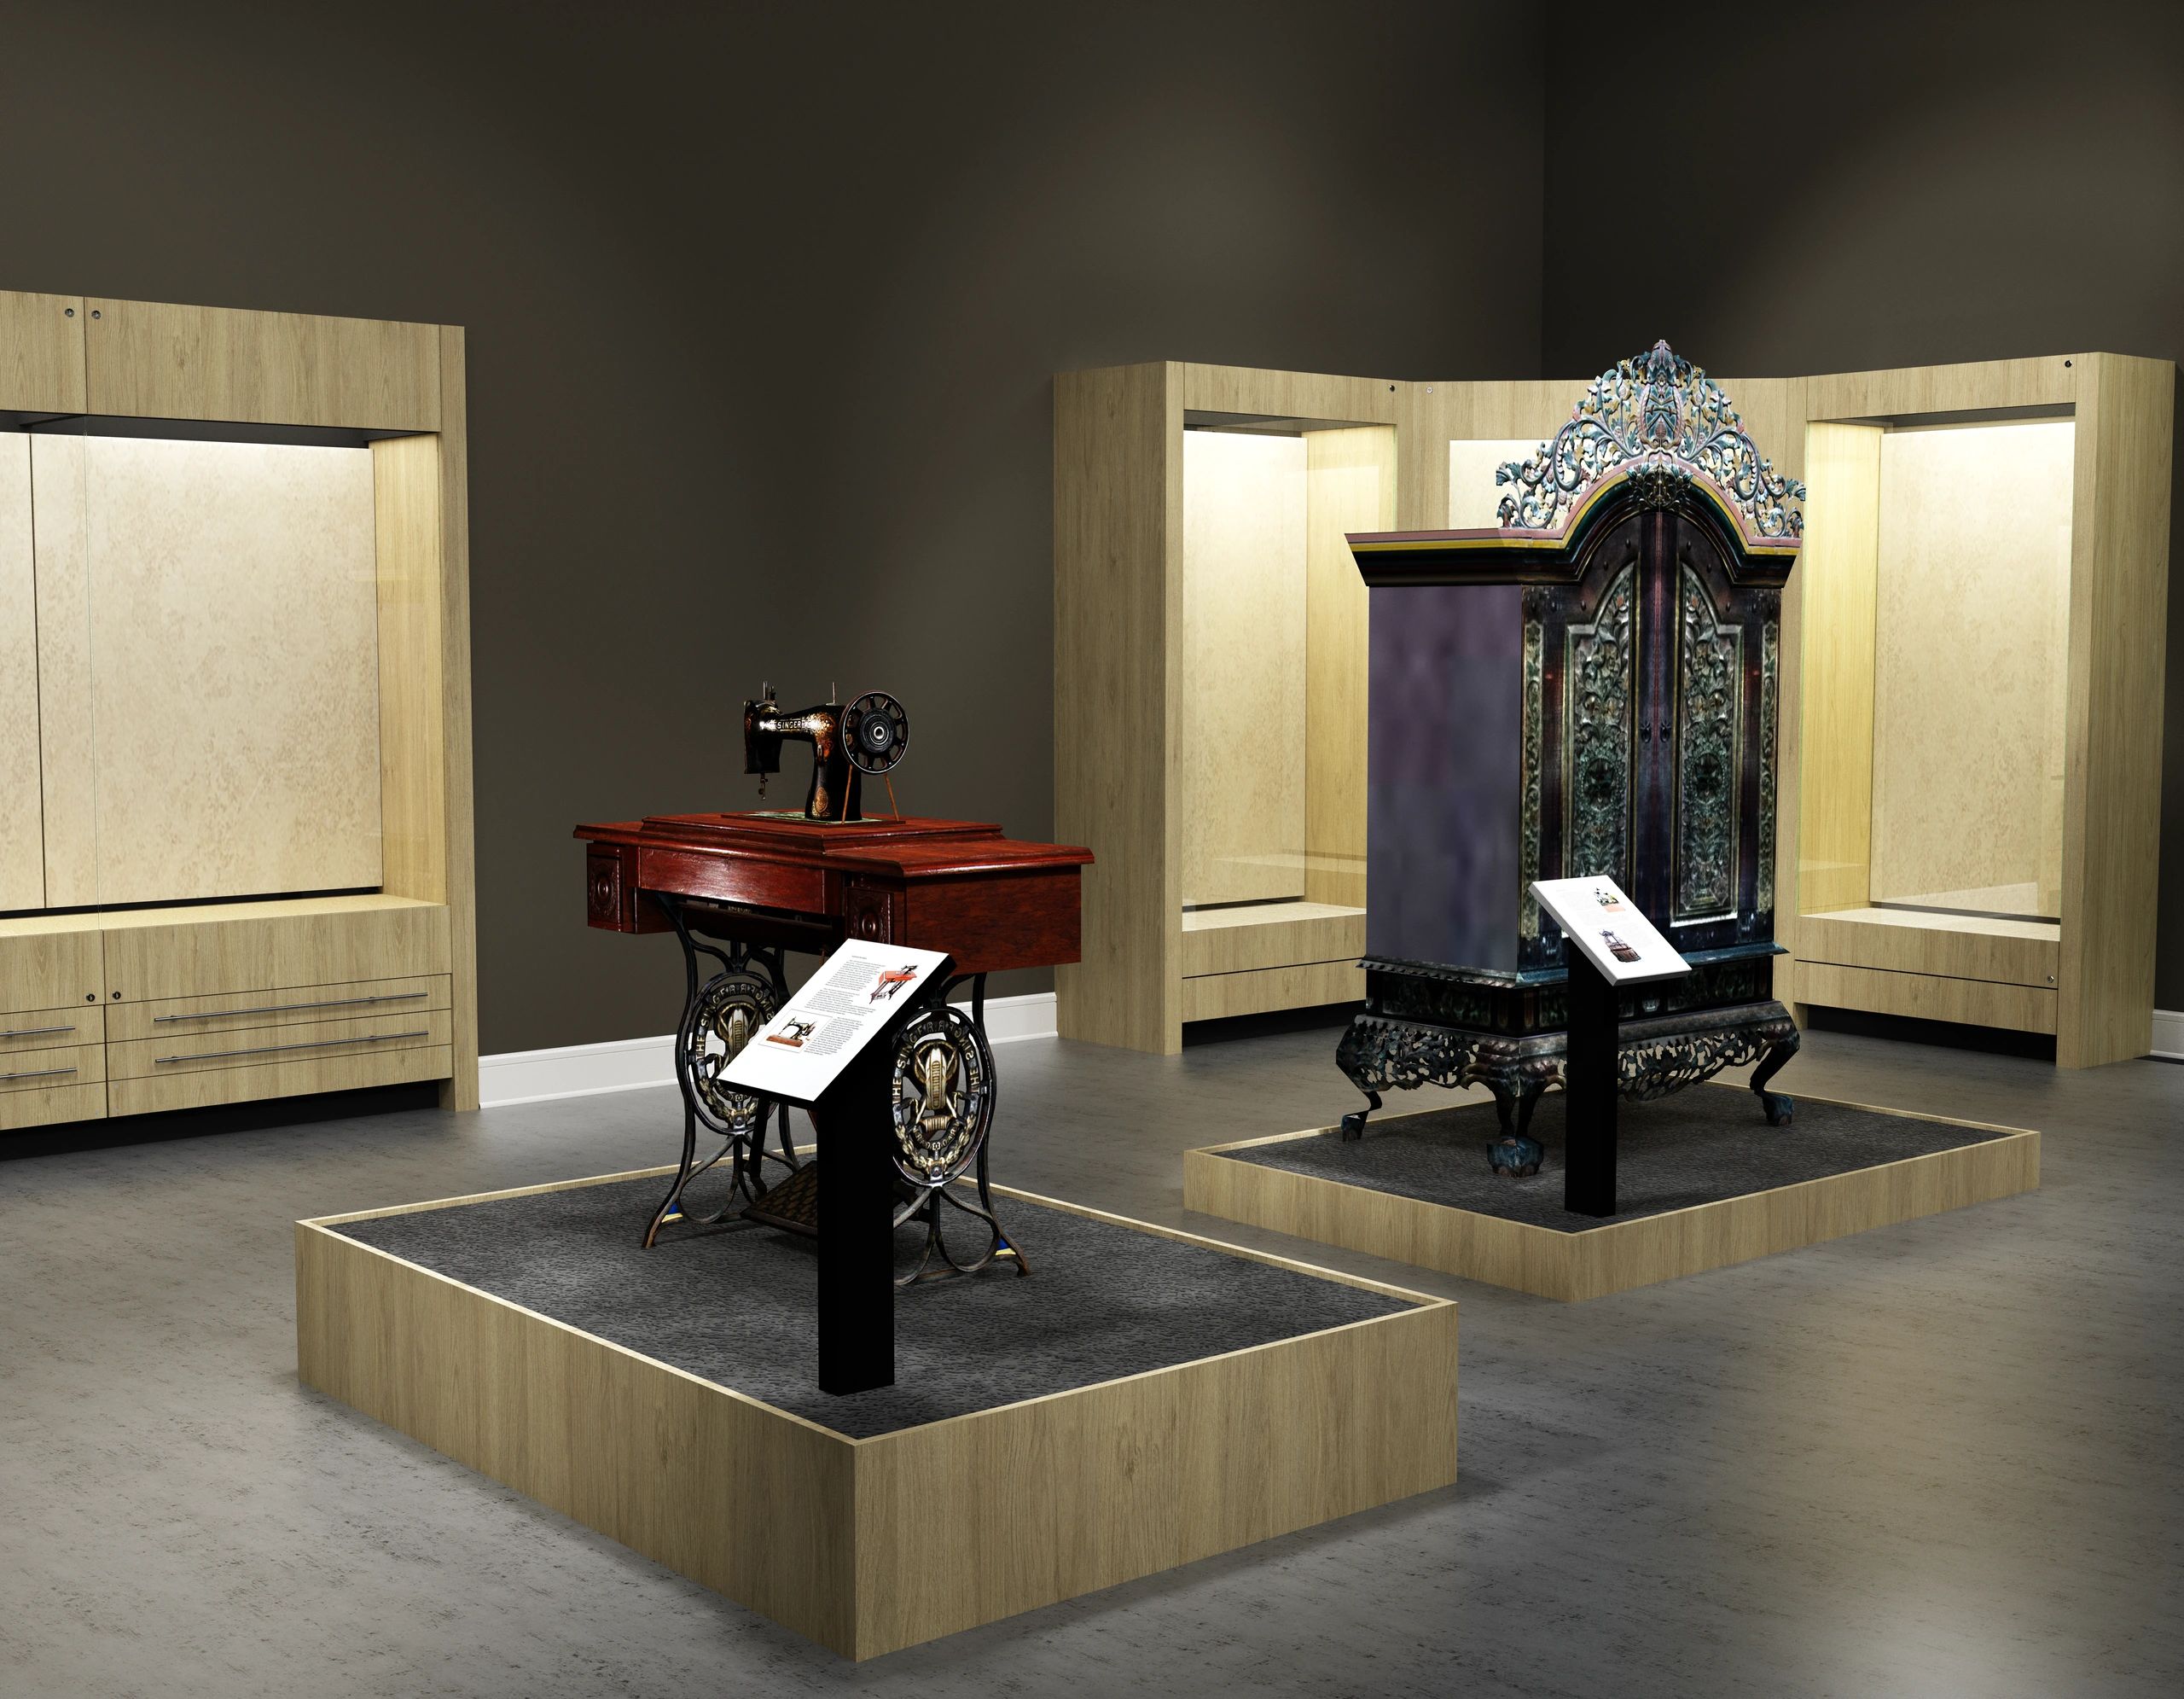 Display Cases for Museums and Exhibits